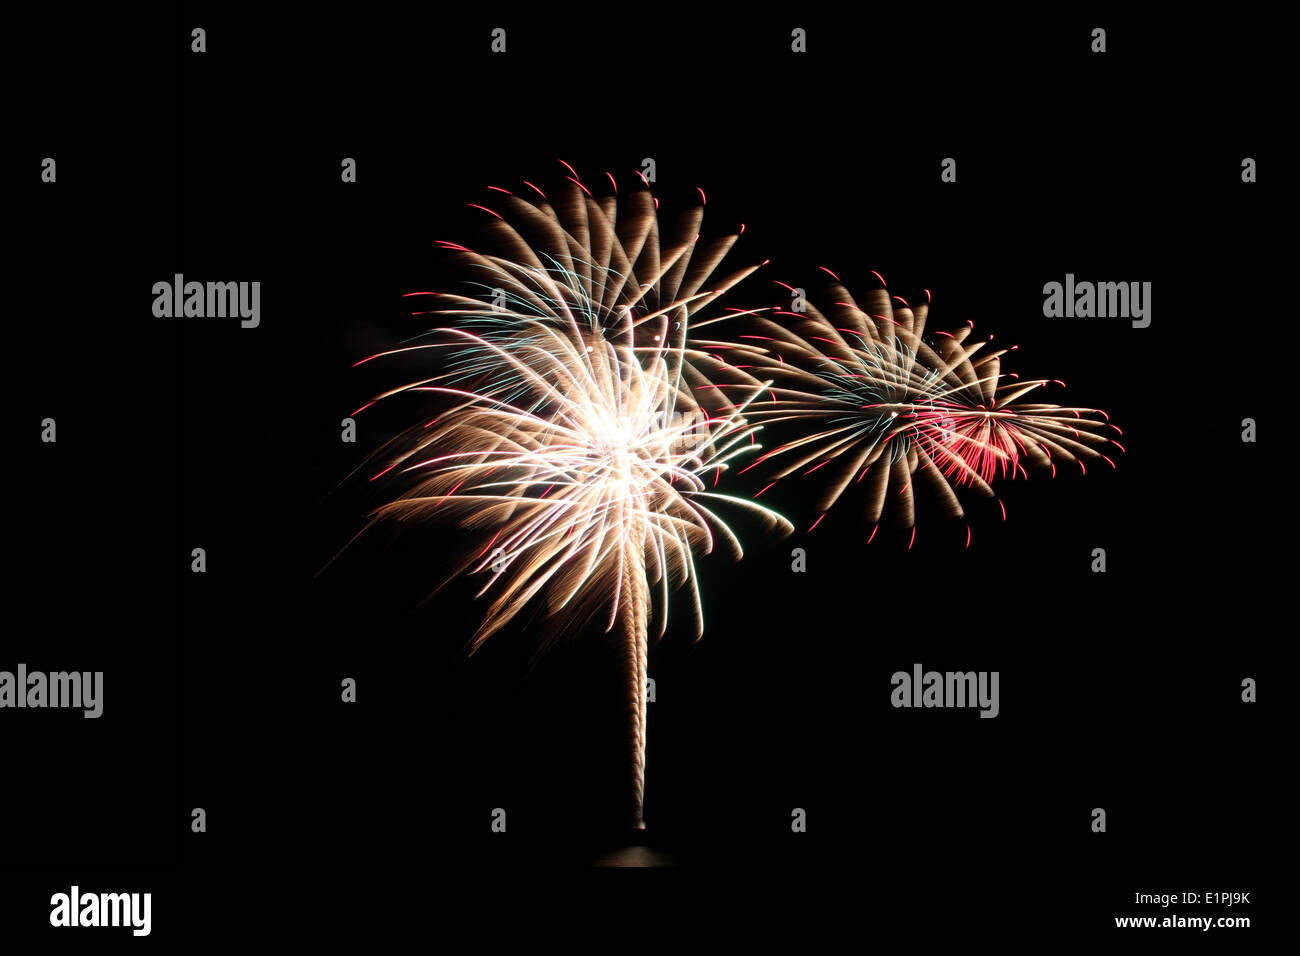 fireworks or firecracker of colorful brightly the night sky. Stock Photo